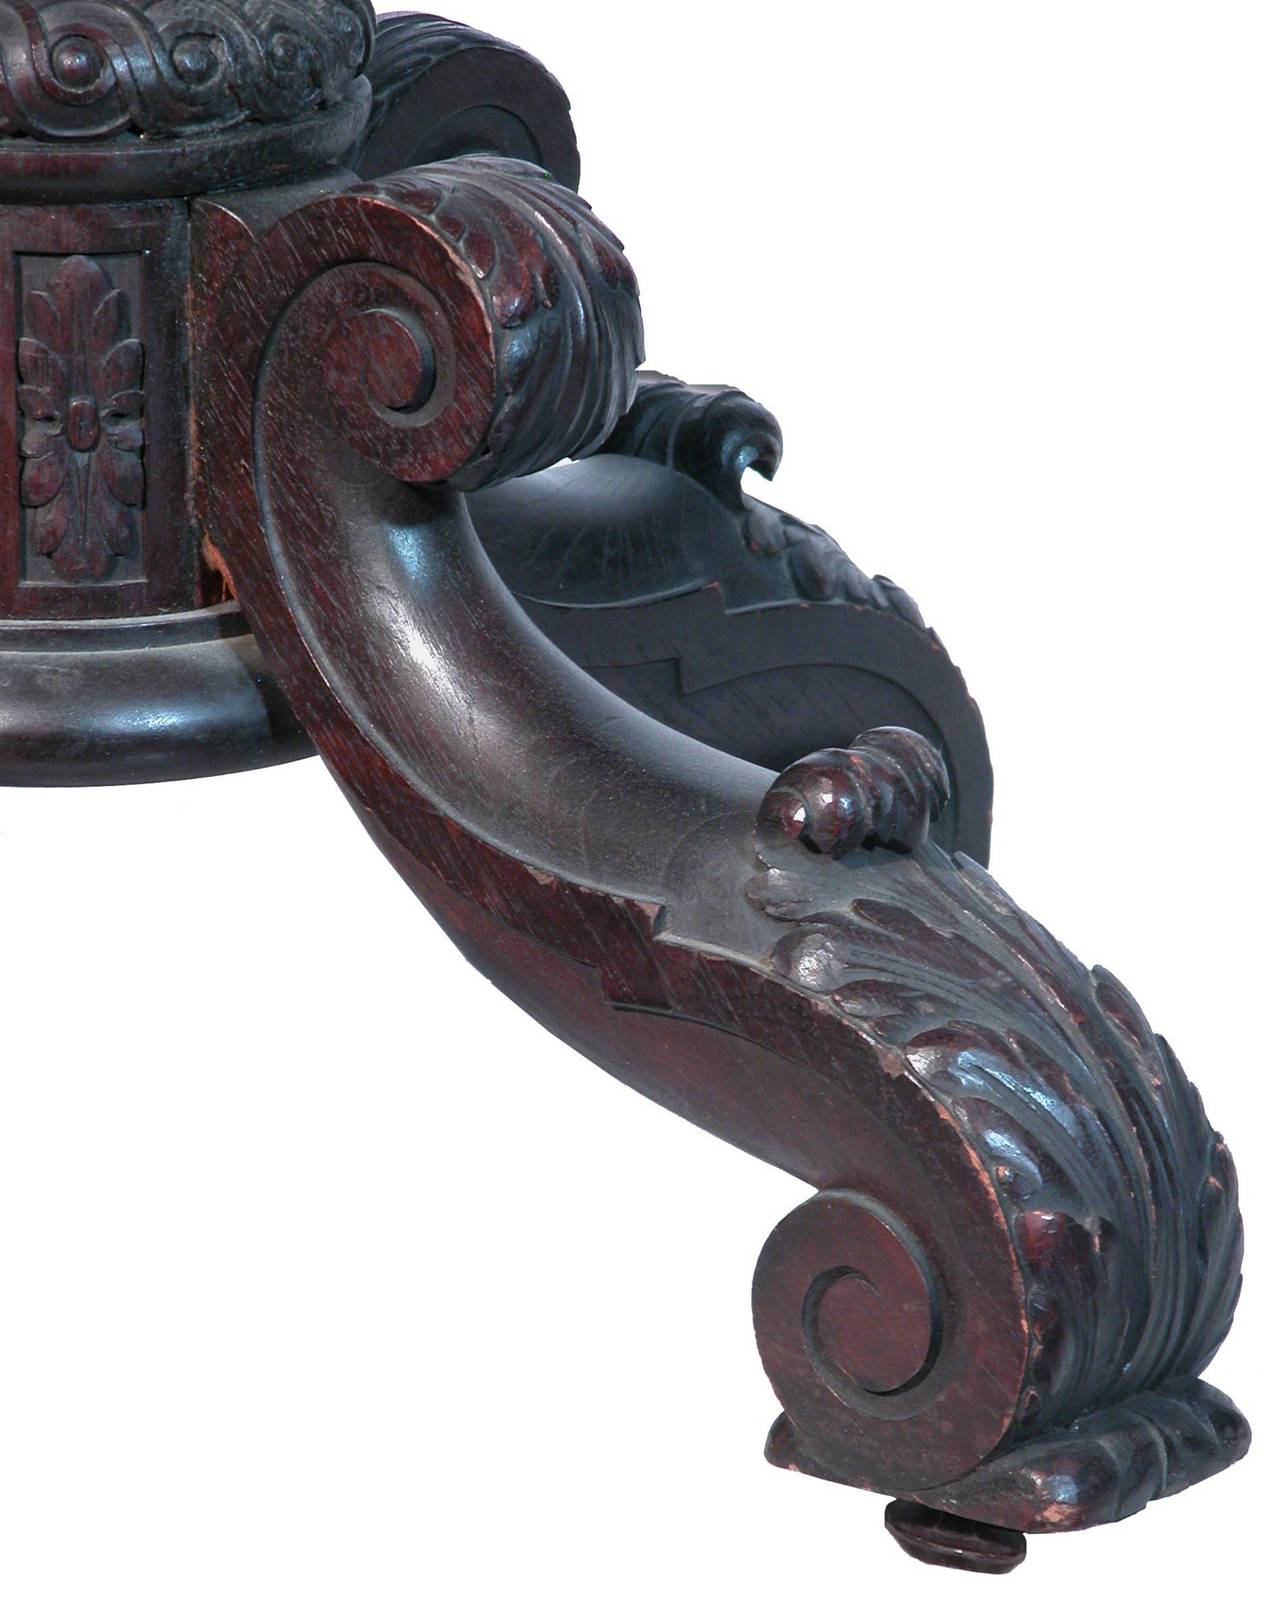 This is a phenomenal masterpiece. It is composed of dense heavy mahogany, and carved in a Masterly fashion. The eagles are finely sculpted, as are the dolphins, which are both classical motifs of the period. The sides of the Stand are further